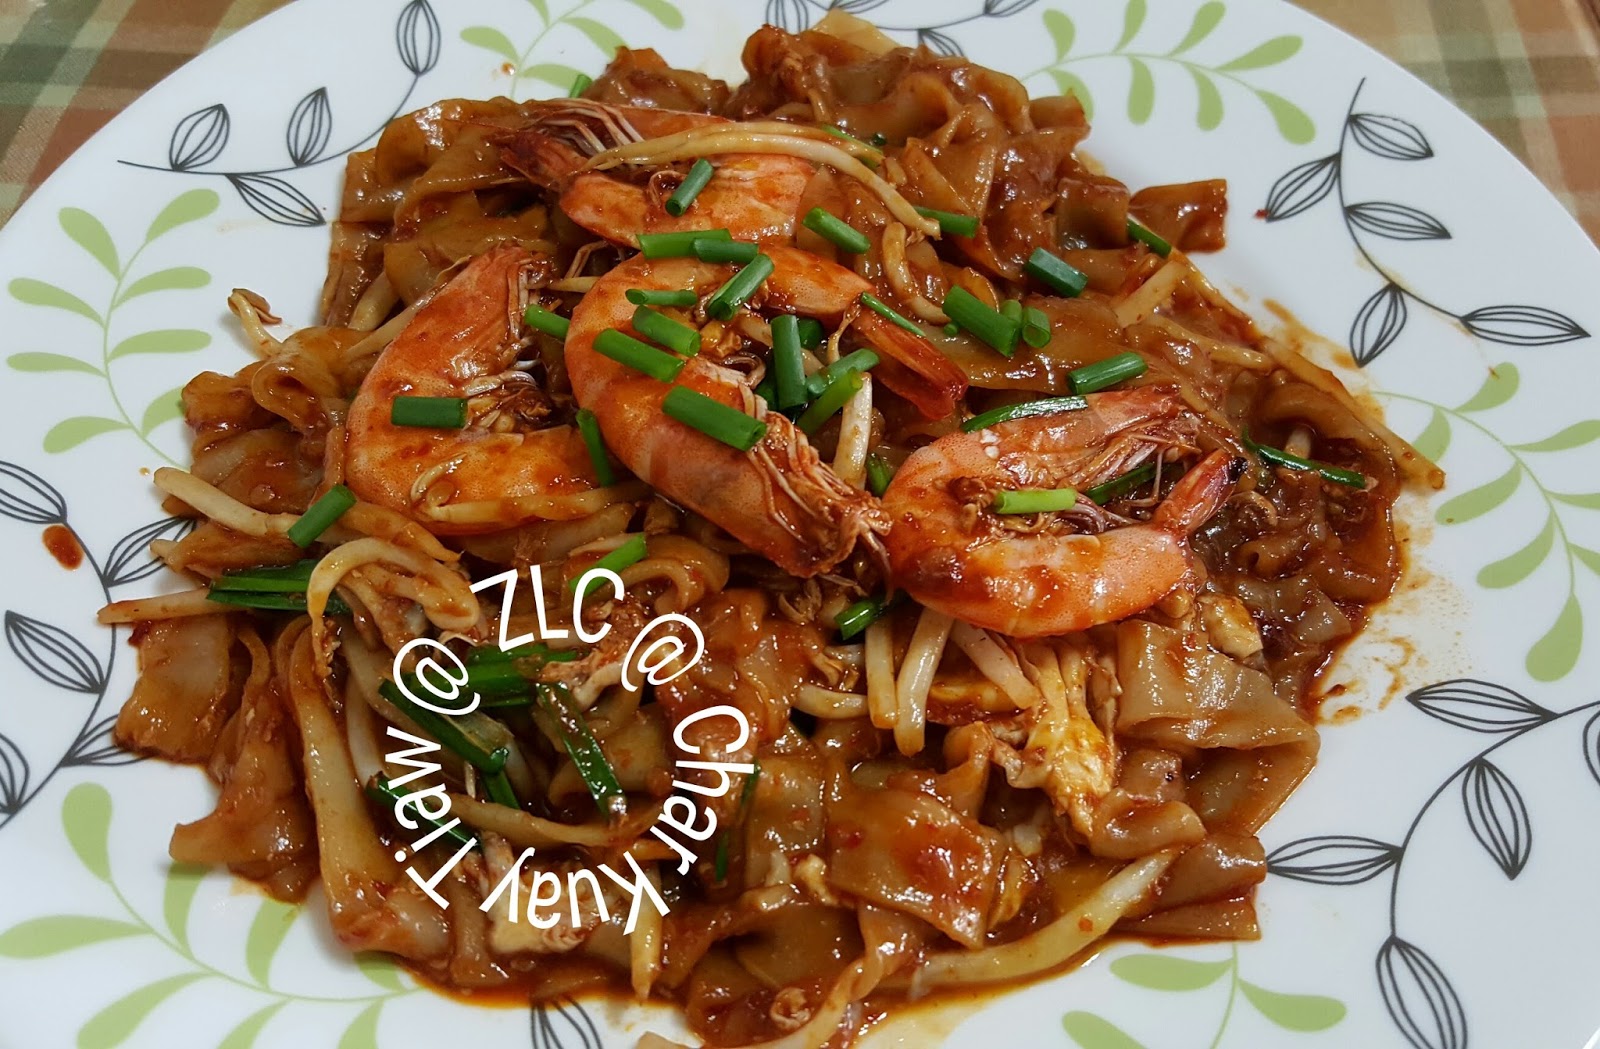 ZULFAZA LOVES COOKING: Resepi Char Kuey teow